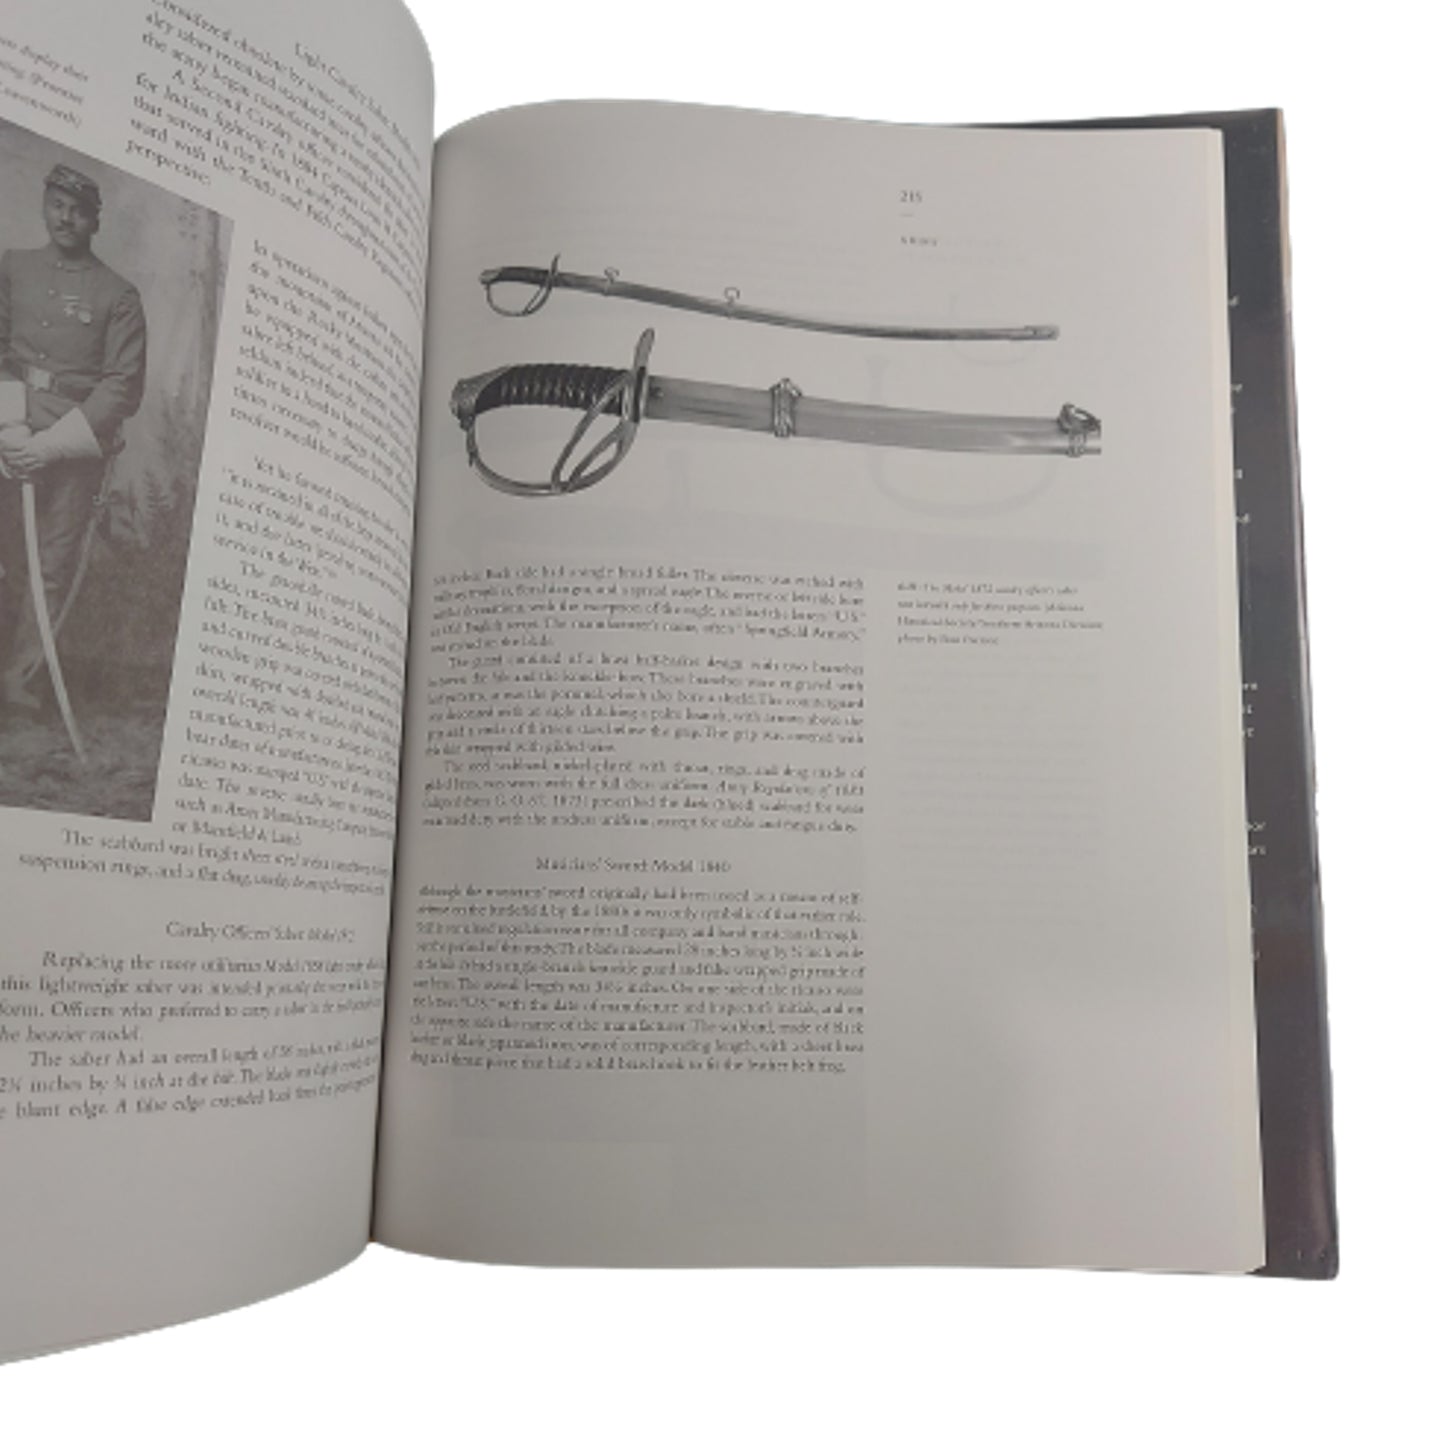 Uniforms, Arms, And Equipment If The U.S. Army 1880-1892 Vol. 2 Weapons and Accouterments